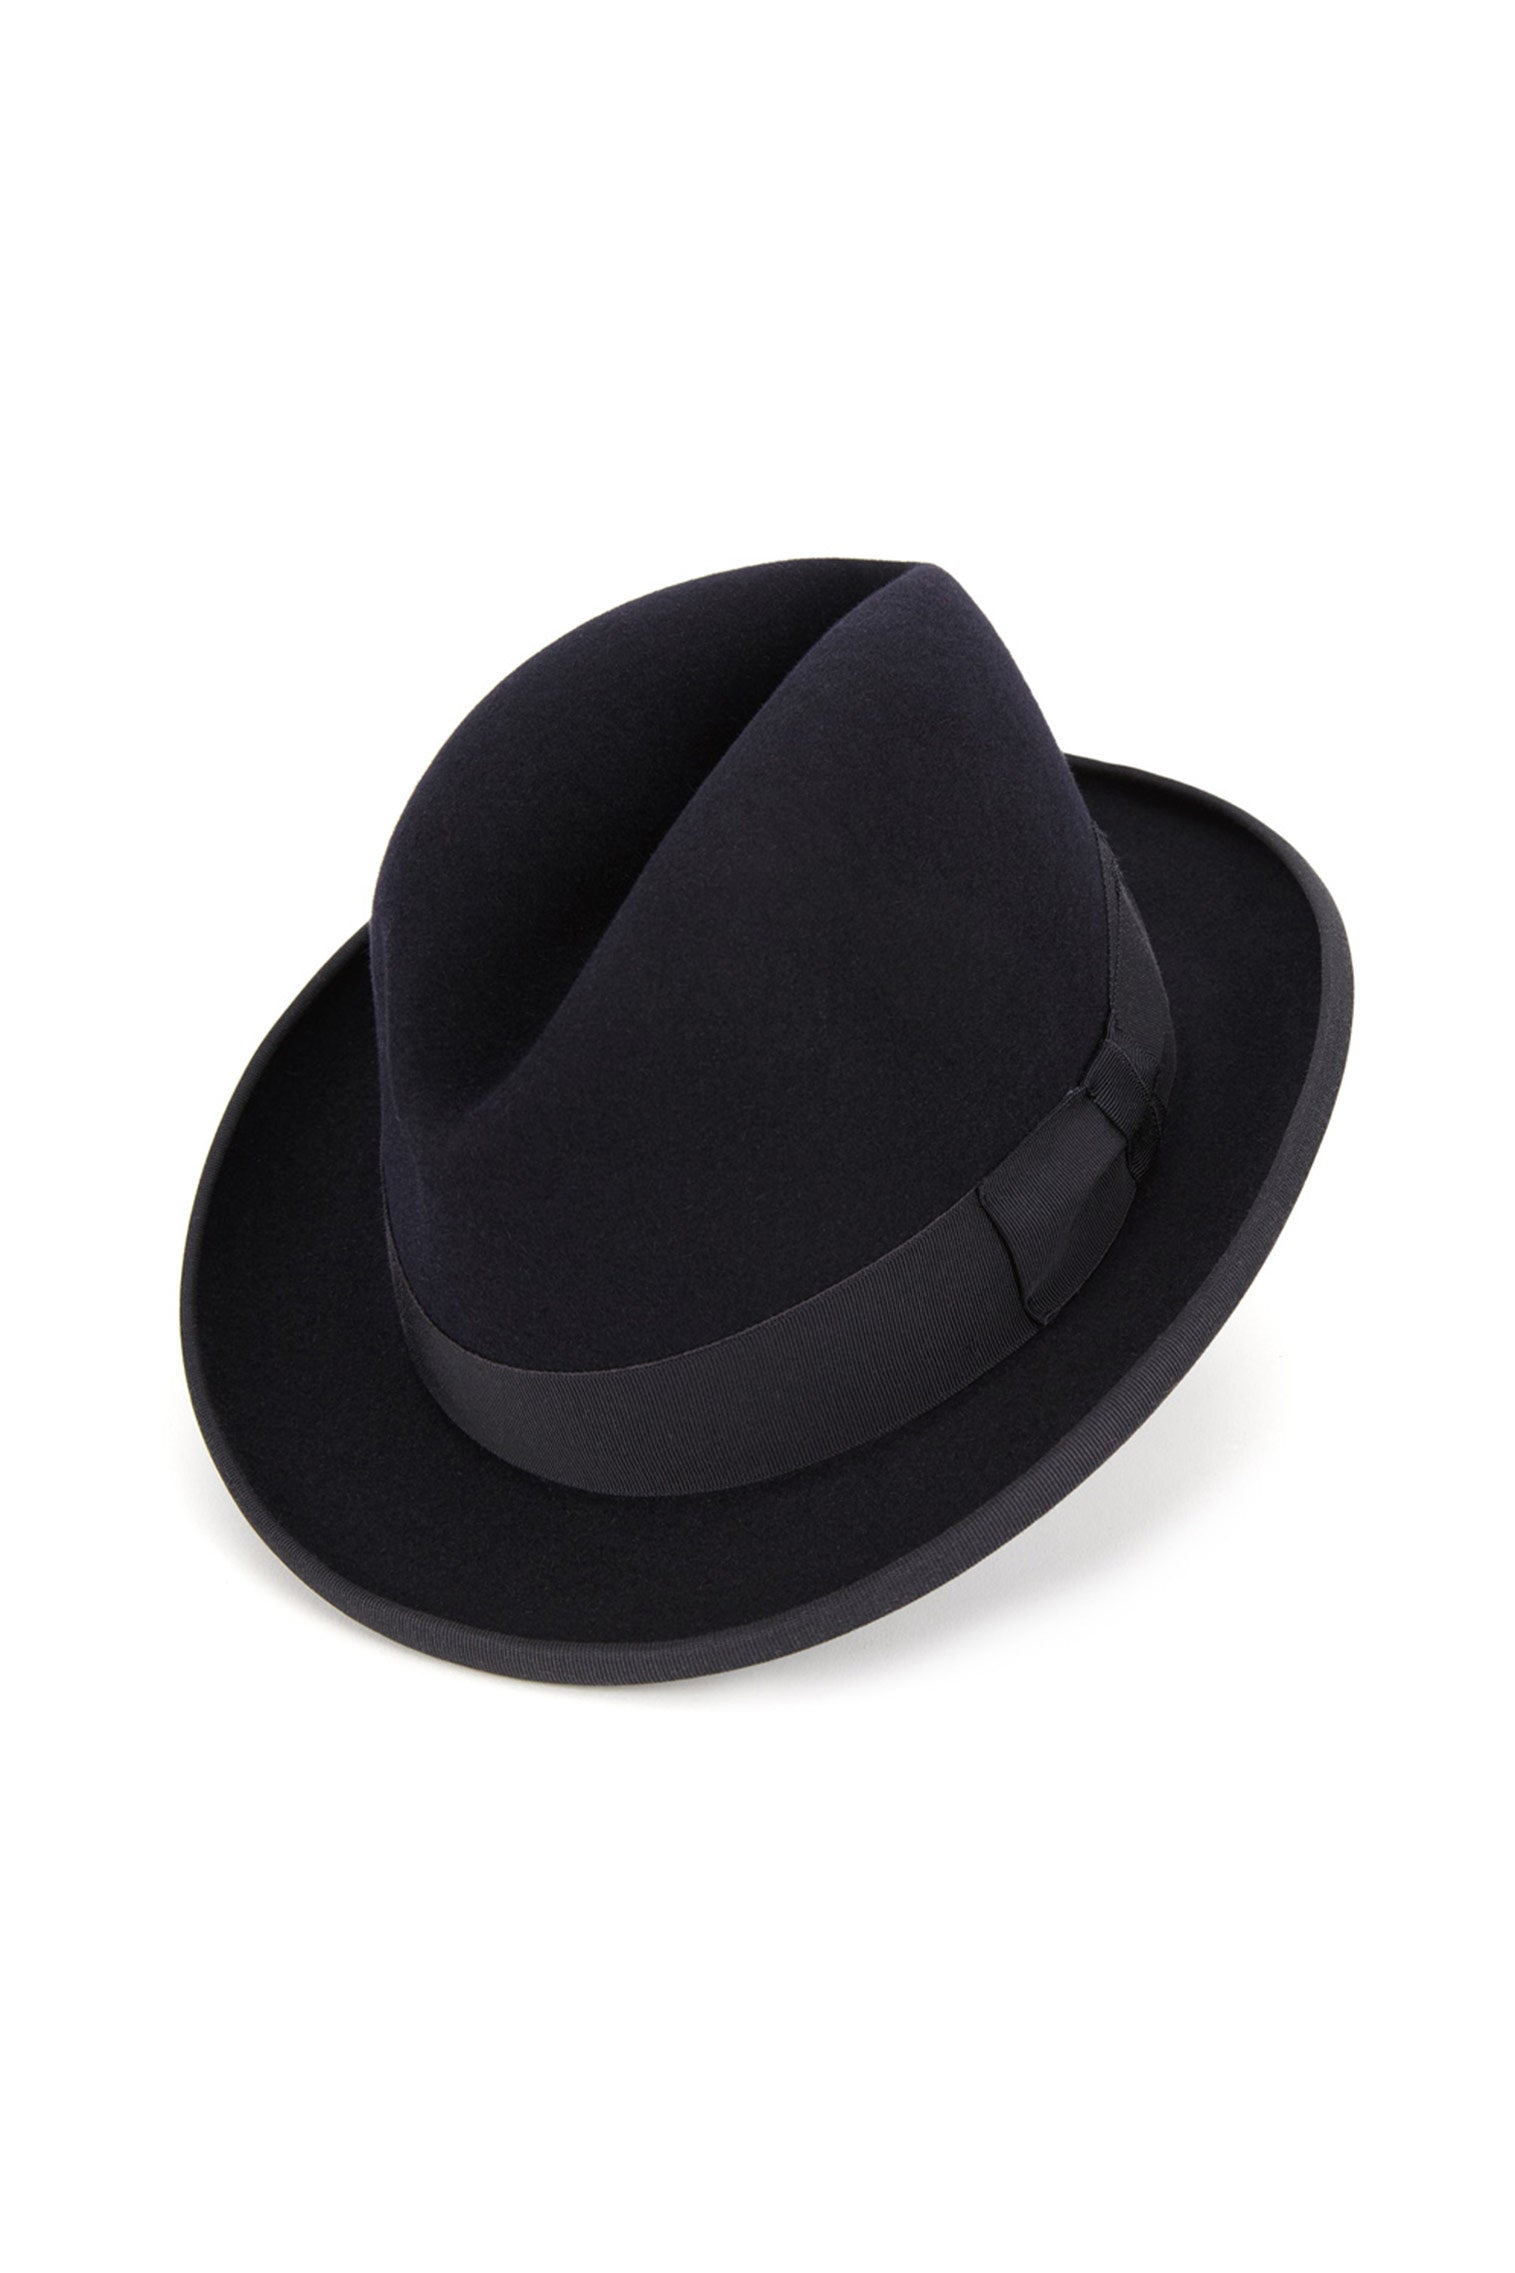 Supreme Navy Homburg - All Ready to Wear - Lock & Co. Hatters London UK